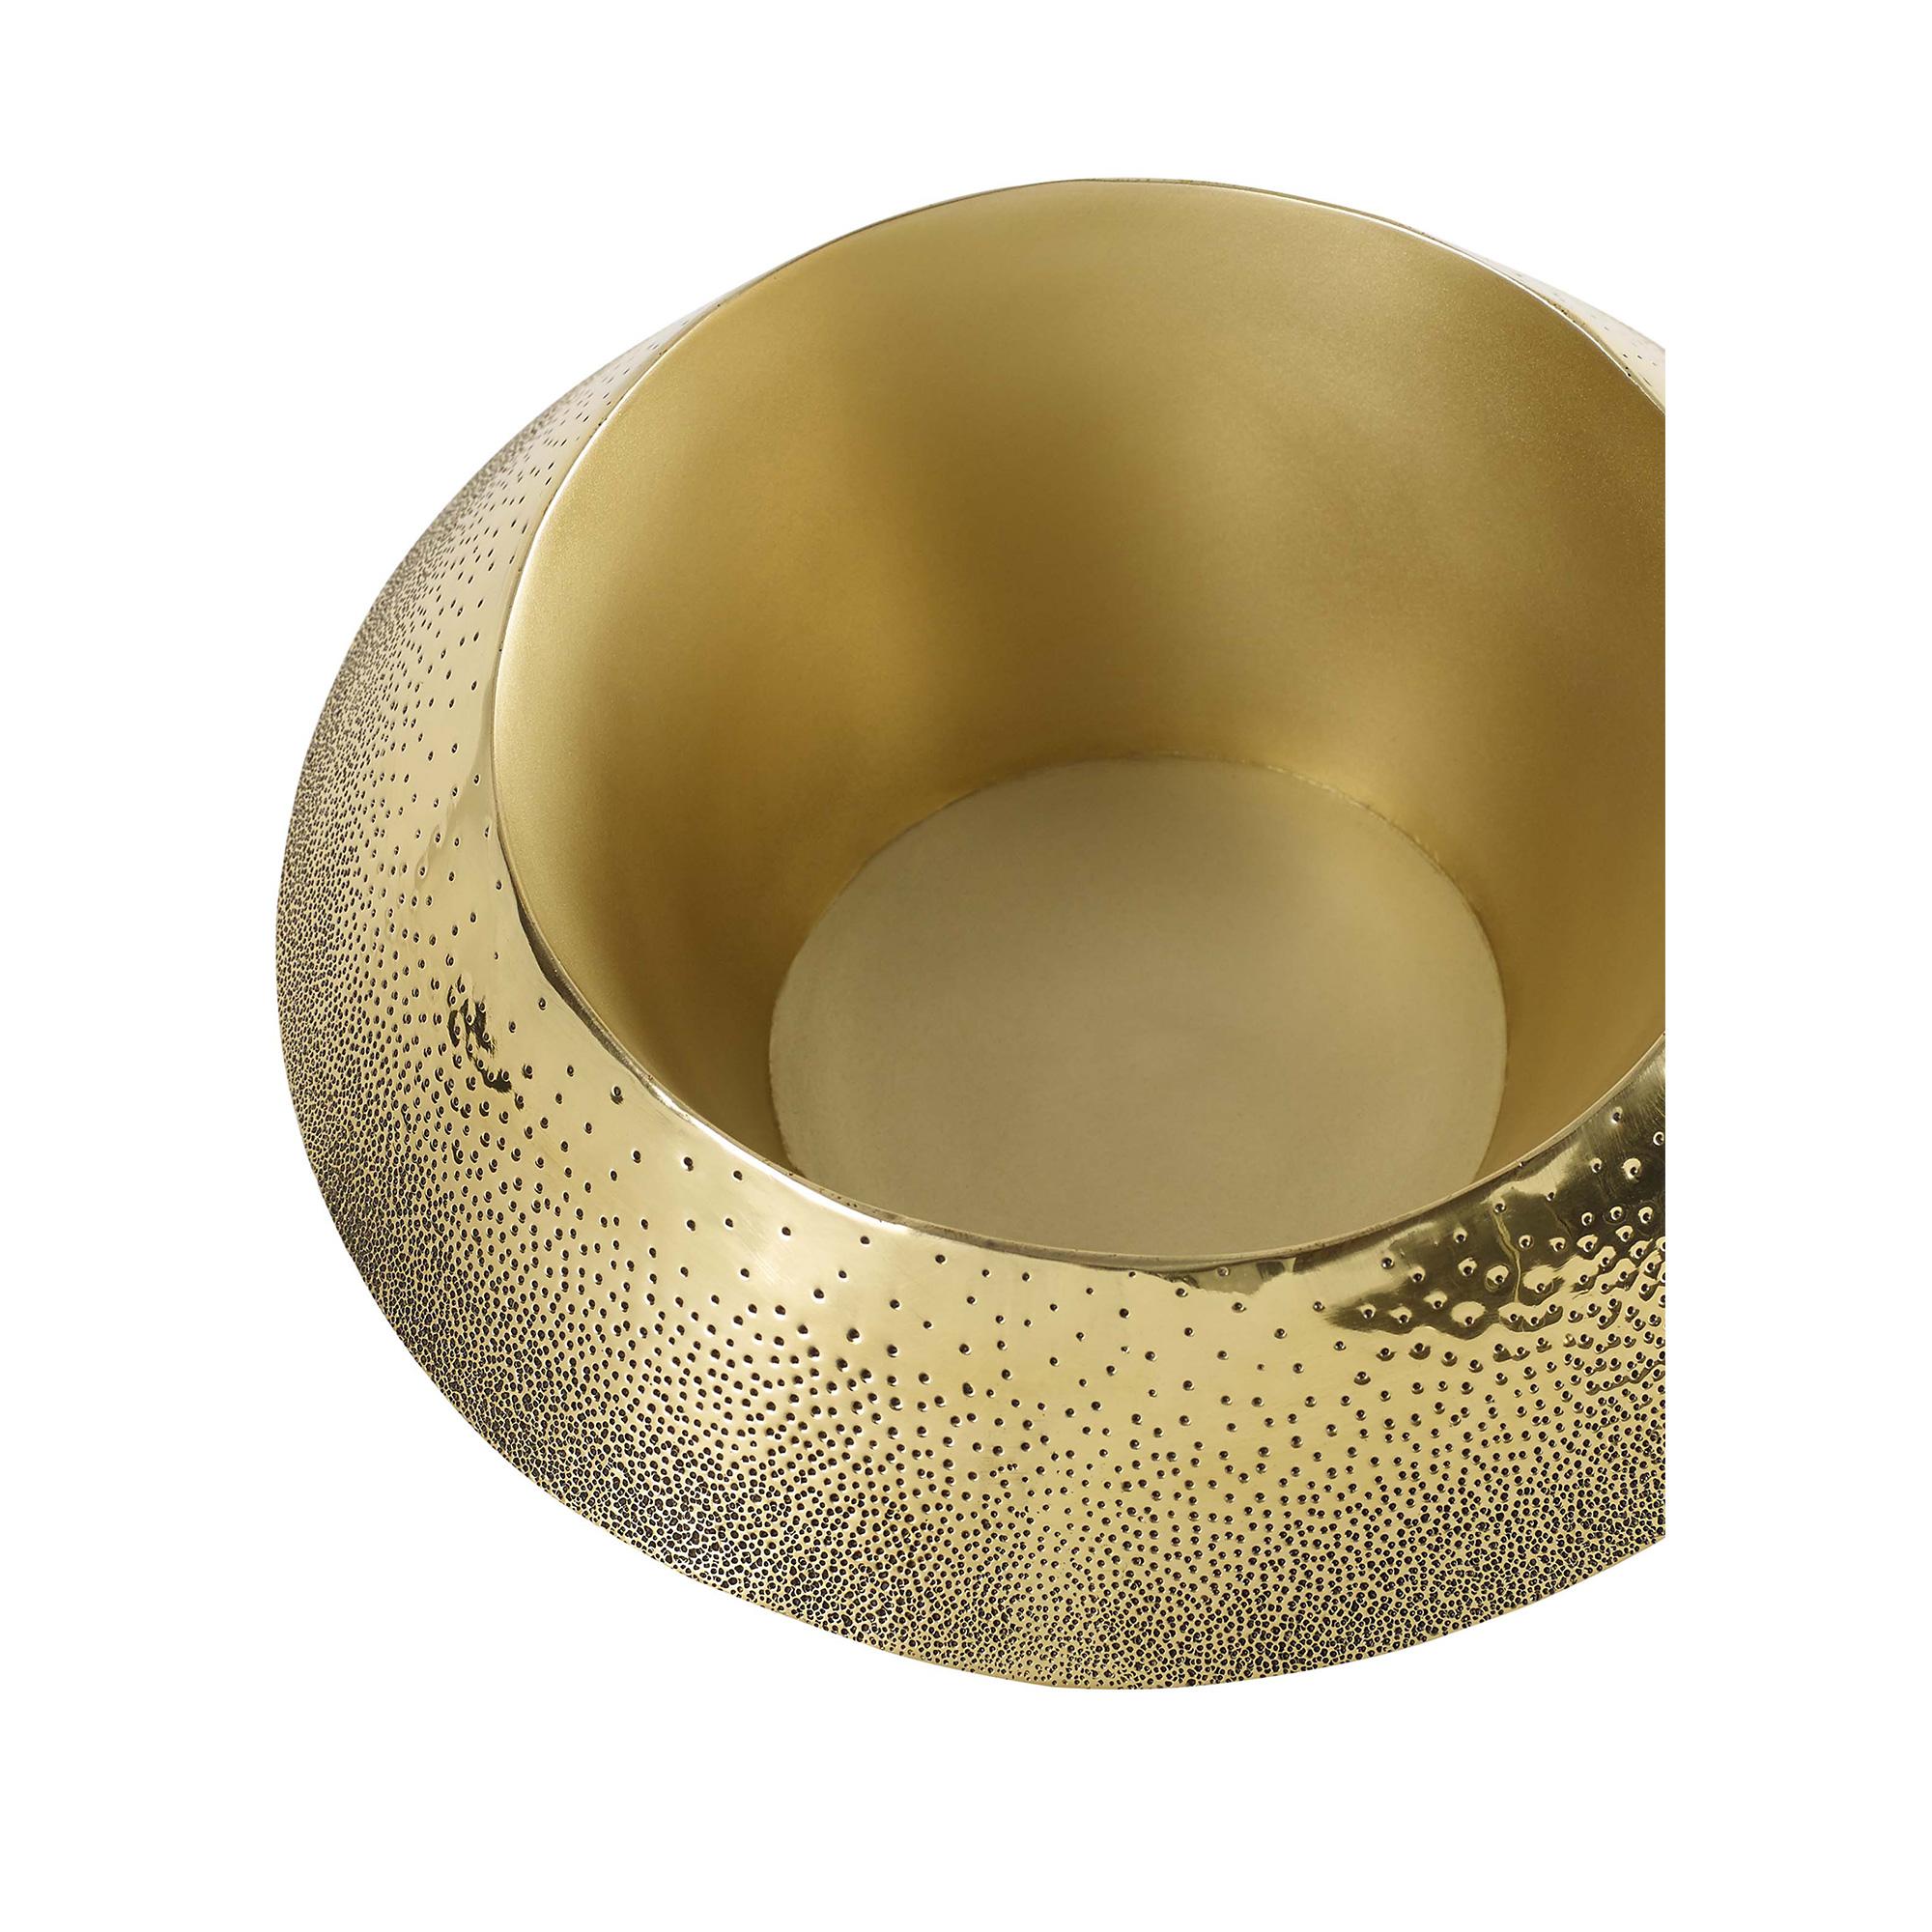 A handmade brass bowl detailed with a dotted, textured exterior. Features a matte brass interior and a shiny brass exterior.
 